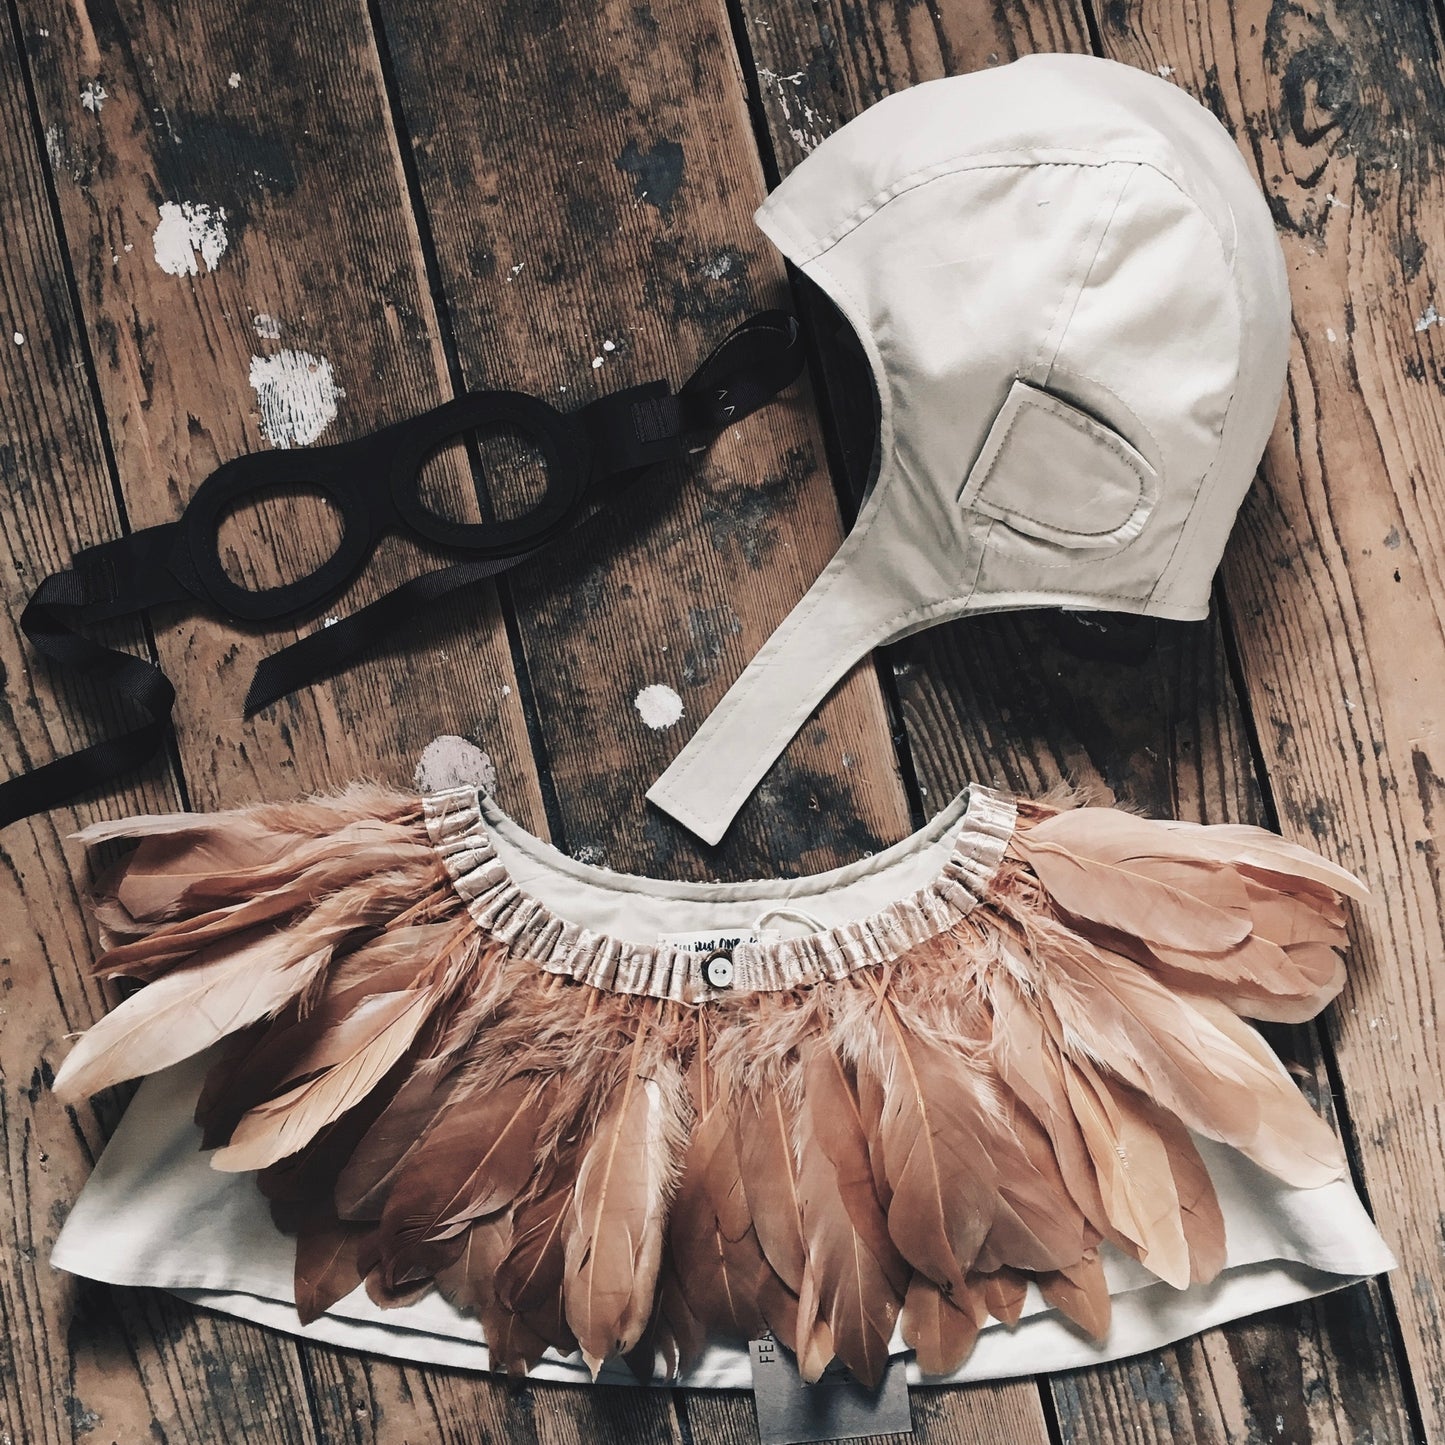 flat lay - a child's explorer costume arranged on wooden floorboards. Beige flying hat, copper feather cape and leather flying goggles